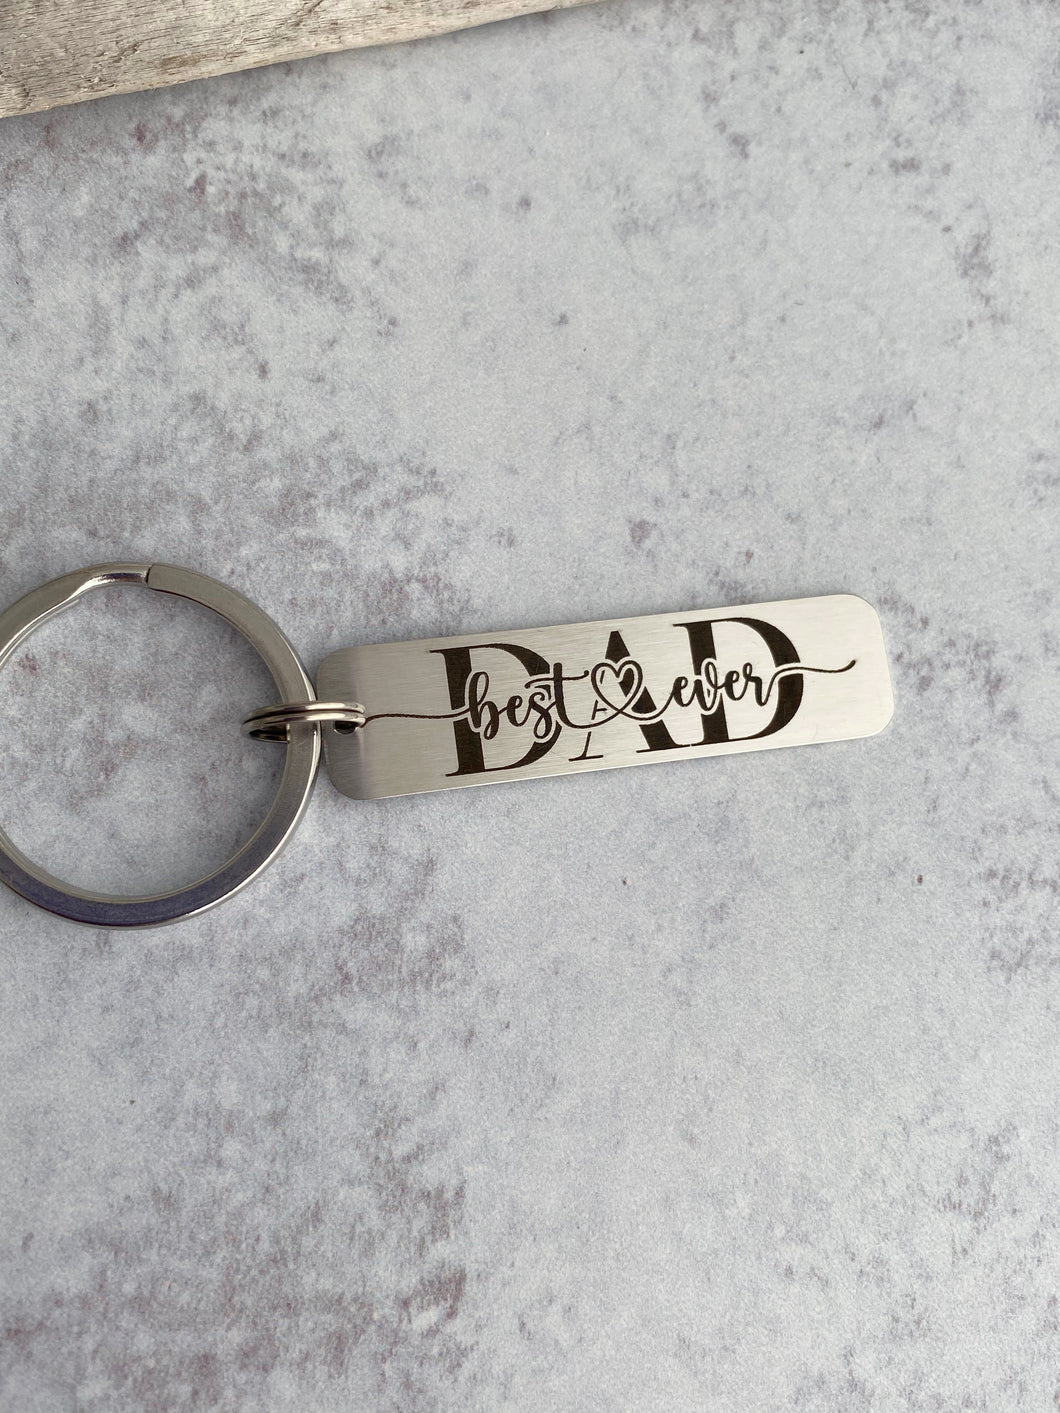 Best dad ever keychain - Grandpa, Father, Papa, Dad or Daddy engraved stainless steel keyring